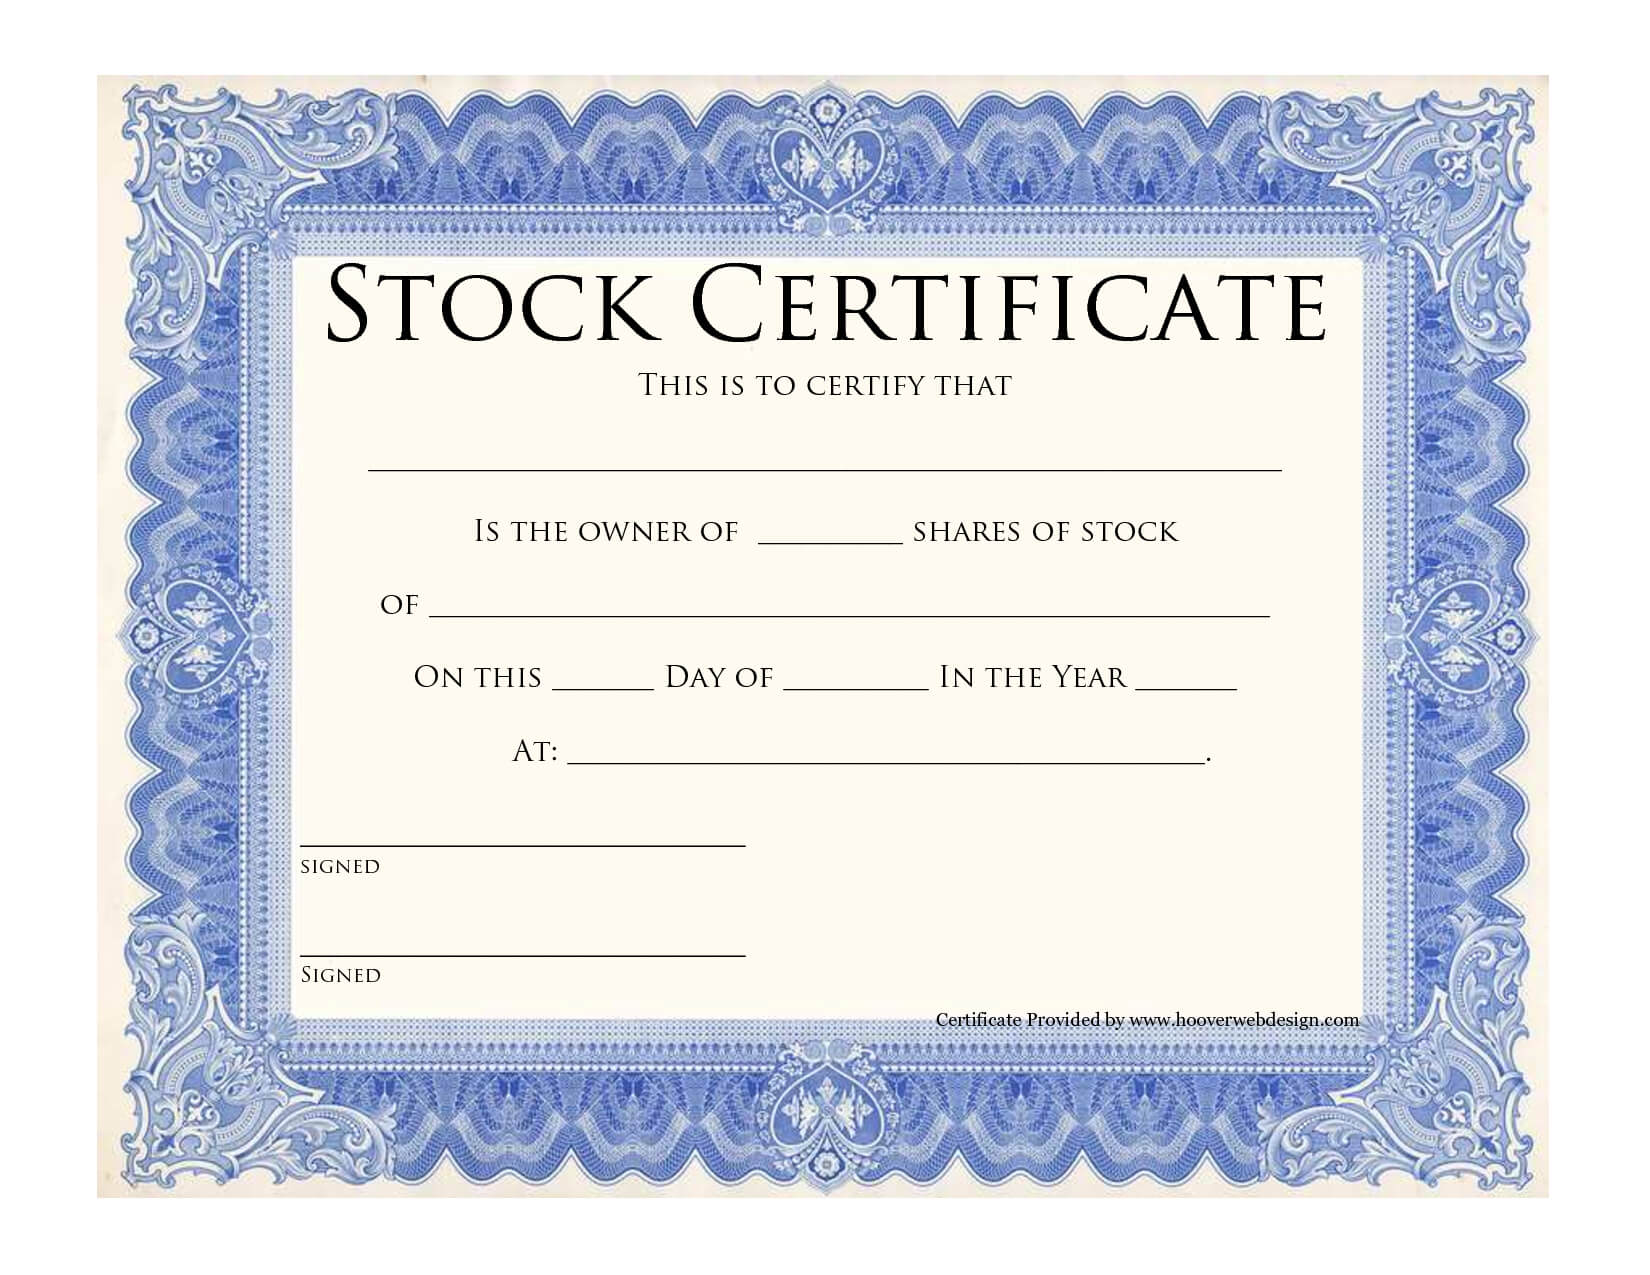 10+ Share Certificate Templates | Word, Excel & Pdf For Stock Certificate Template Word